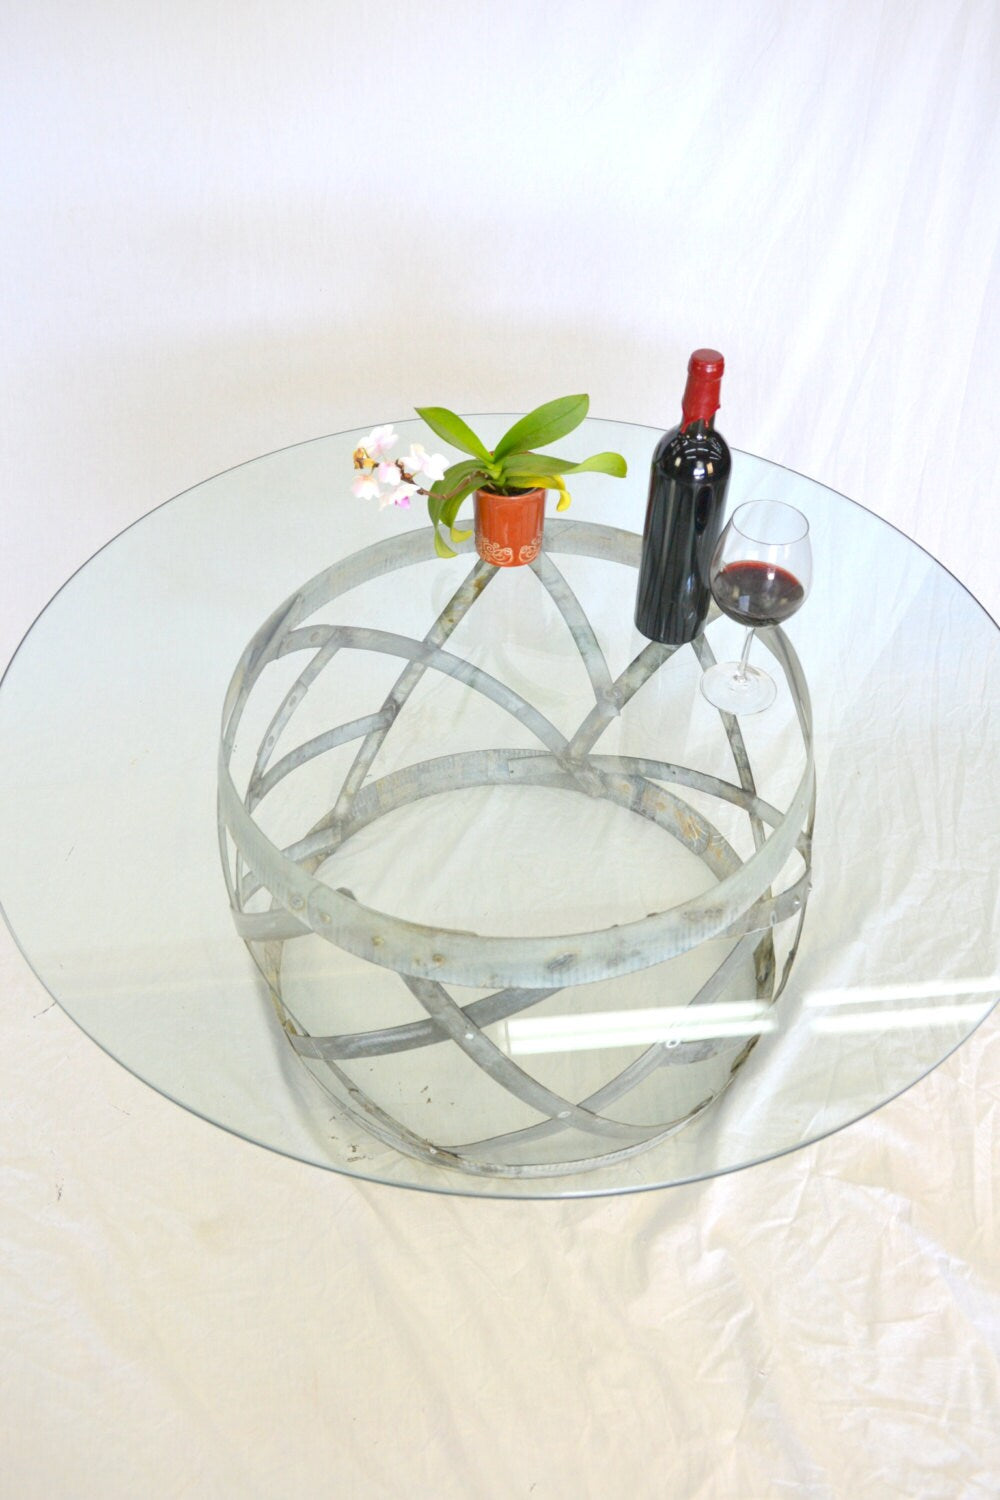 Wine Barrel Ring Coffee Table - Tanovi - made from retired Napa wine barrel rings. 100% Recycled!